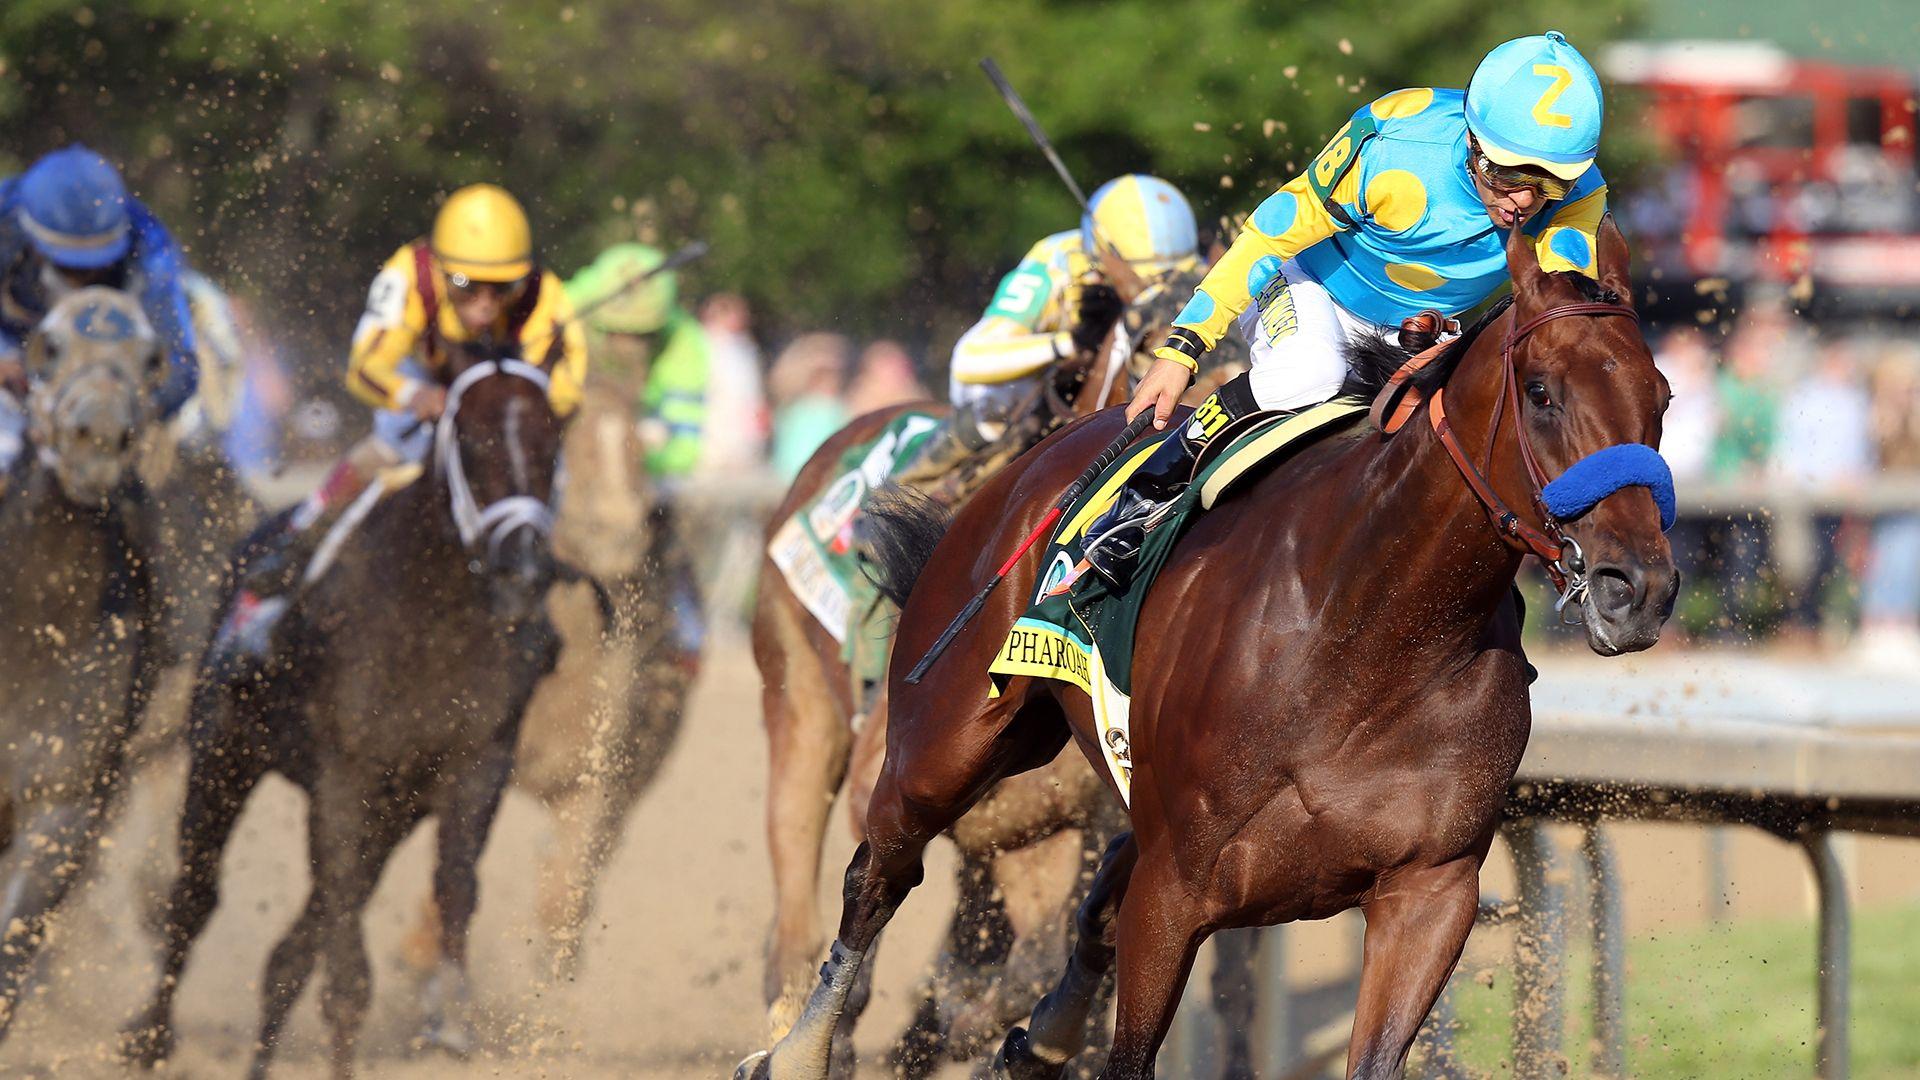 Things to Know About the Kentucky Derby